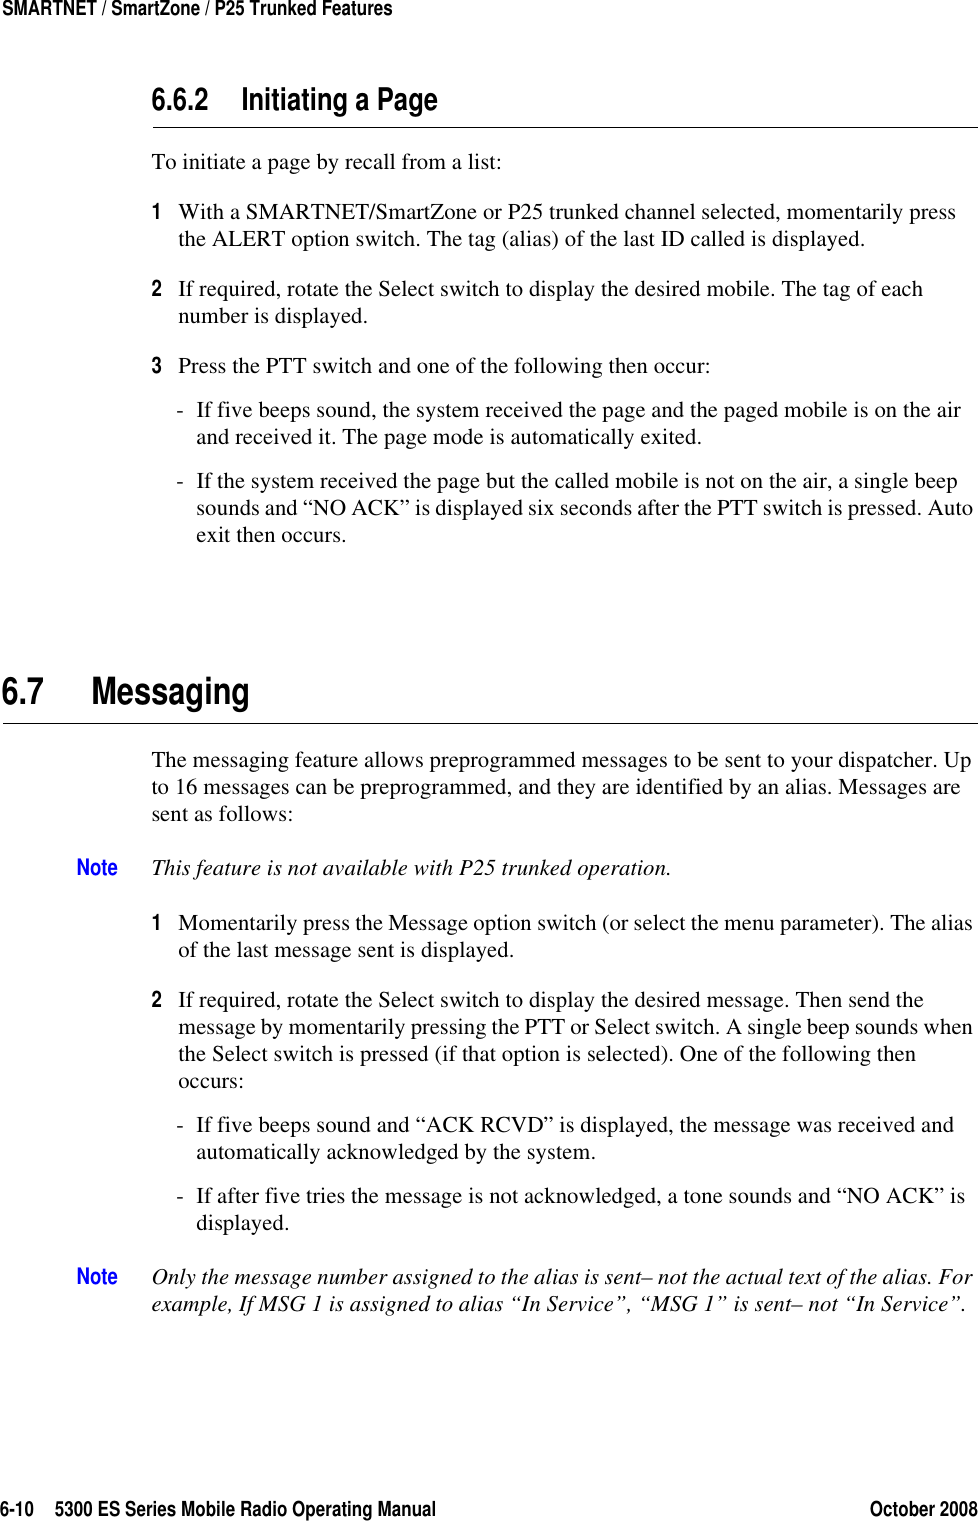 6-10 5300 ES Series Mobile Radio Operating Manual October 2008SMARTNET / SmartZone / P25 Trunked Features6.6.2 Initiating a PageTo initiate a page by recall from a list:1With a SMARTNET/SmartZone or P25 trunked channel selected, momentarily press the ALERT option switch. The tag (alias) of the last ID called is displayed.2If required, rotate the Select switch to display the desired mobile. The tag of each number is displayed.3Press the PTT switch and one of the following then occur:- If five beeps sound, the system received the page and the paged mobile is on the air and received it. The page mode is automatically exited.- If the system received the page but the called mobile is not on the air, a single beep sounds and “NO ACK” is displayed six seconds after the PTT switch is pressed. Auto exit then occurs.6.7 MessagingThe messaging feature allows preprogrammed messages to be sent to your dispatcher. Up to 16 messages can be preprogrammed, and they are identified by an alias. Messages are sent as follows:Note This feature is not available with P25 trunked operation.1Momentarily press the Message option switch (or select the menu parameter). The alias of the last message sent is displayed.2If required, rotate the Select switch to display the desired message. Then send the message by momentarily pressing the PTT or Select switch. A single beep sounds when the Select switch is pressed (if that option is selected). One of the following then occurs:- If five beeps sound and “ACK RCVD” is displayed, the message was received and automatically acknowledged by the system.- If after five tries the message is not acknowledged, a tone sounds and “NO ACK” is displayed. Note Only the message number assigned to the alias is sent– not the actual text of the alias. For example, If MSG 1 is assigned to alias “In Service”, “MSG 1” is sent– not “In Service”.